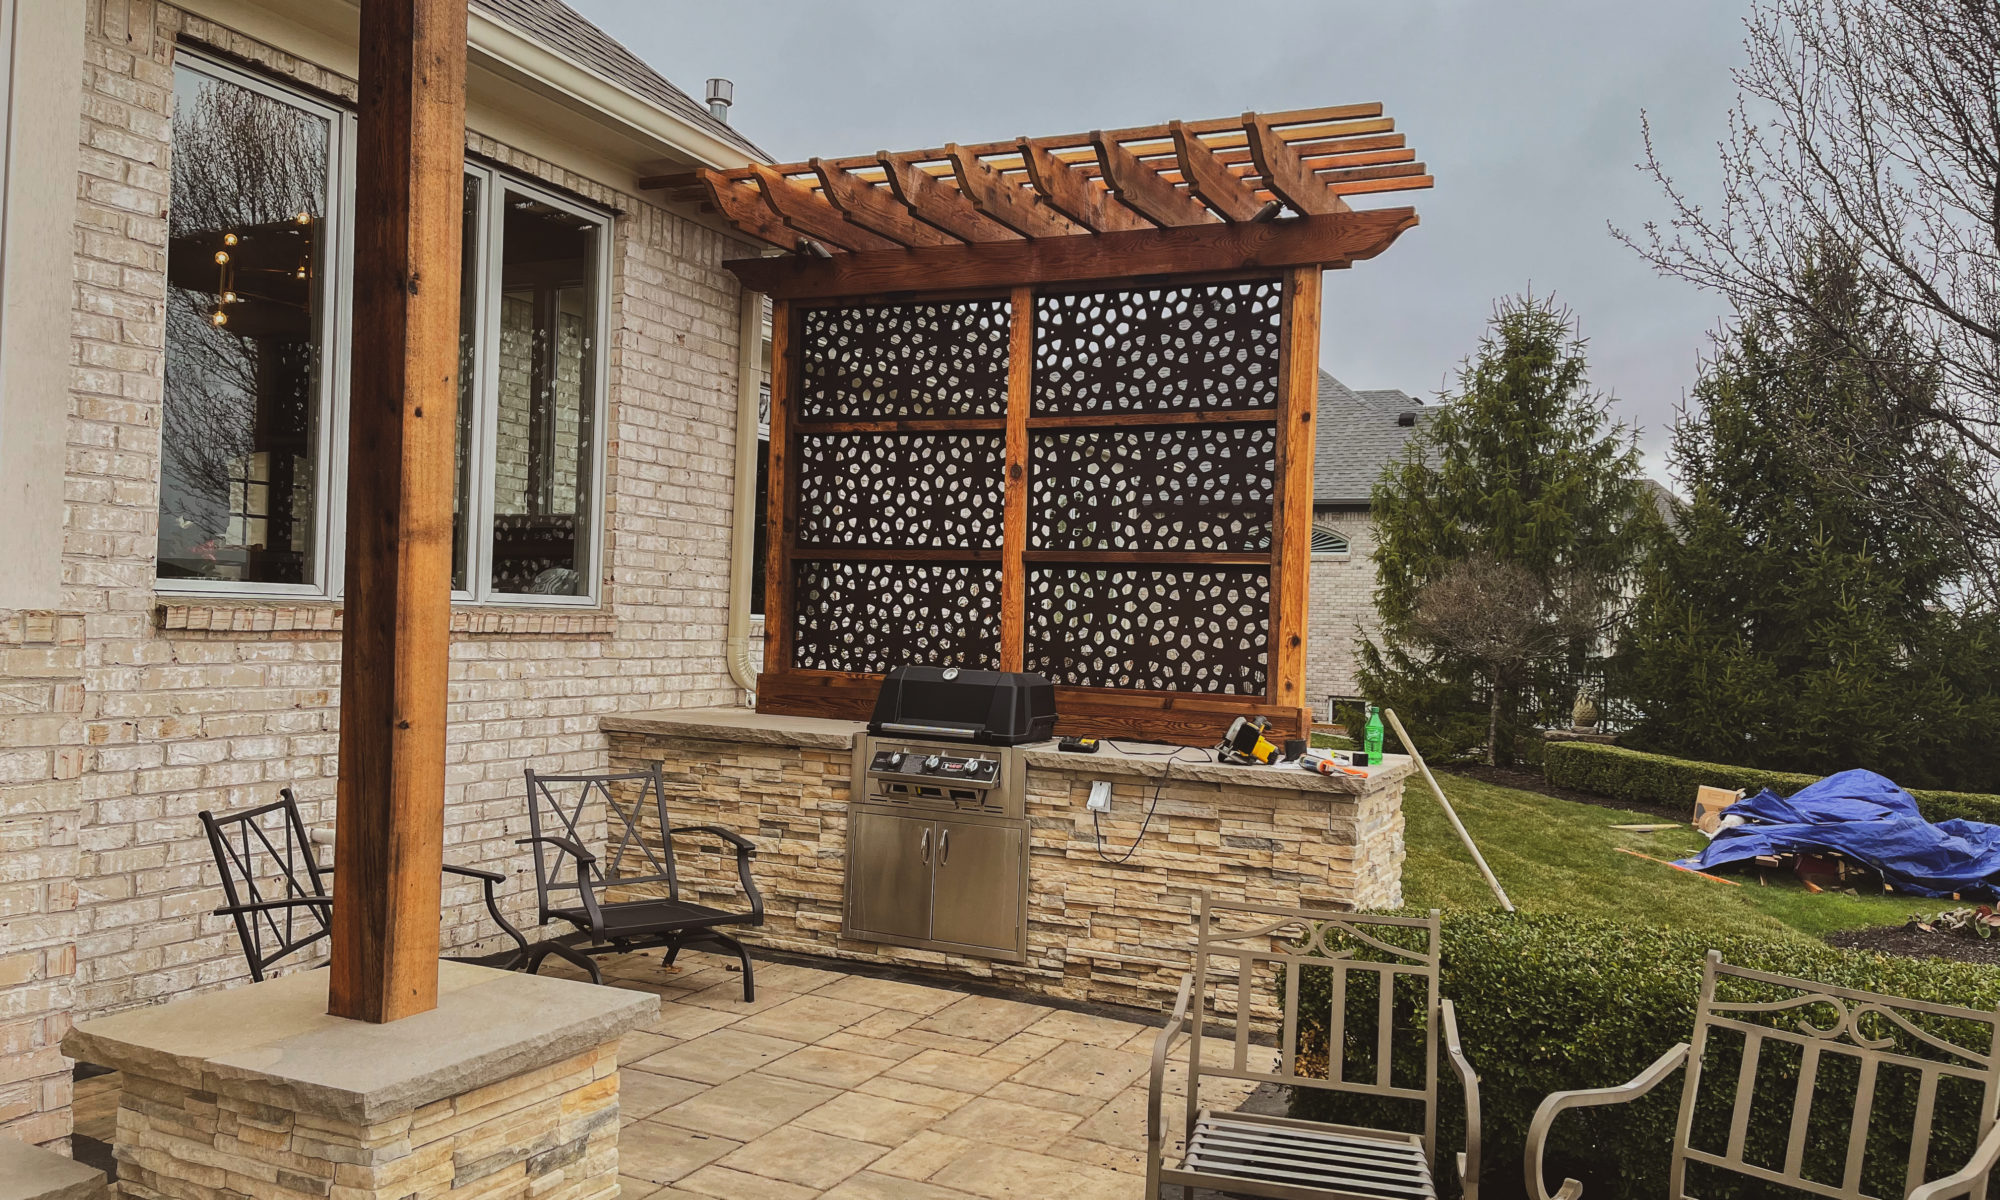 Precision Outdoors Hickory Stick Enclave cedar pergola built-in grill built in paver patio fence privacy screen screens flagstone walkway Bargersville Greenwood Indiana